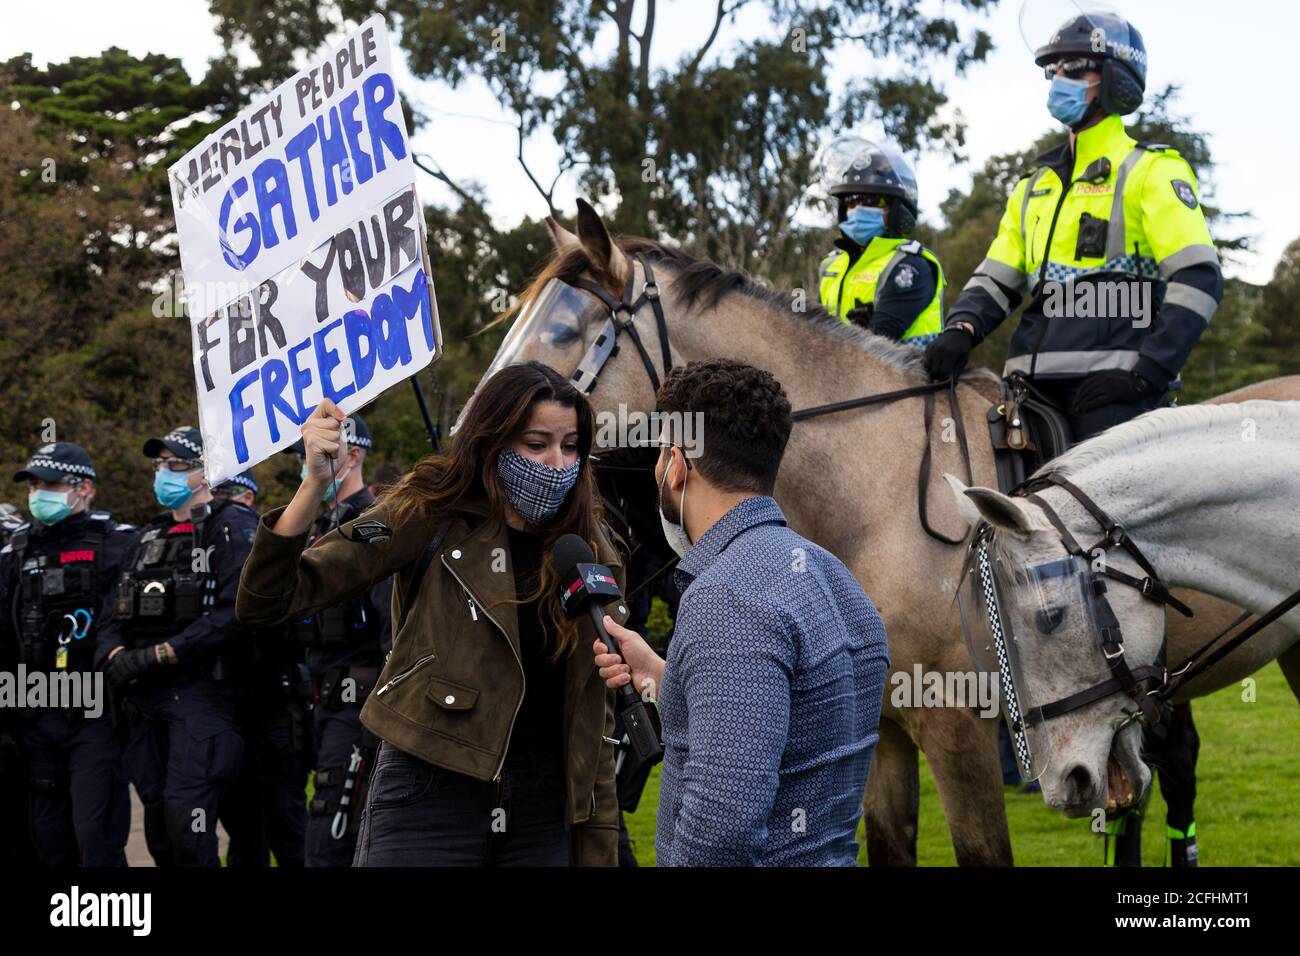 Melbourne, Australia, 5 September, 2020. A woman is interviewed by media flanked by mounted police during the Melbourne Freedom Protest, Phillip Island Circuit, Australia. Credit: Dave Hewison/Alamy Live News Stock Photo